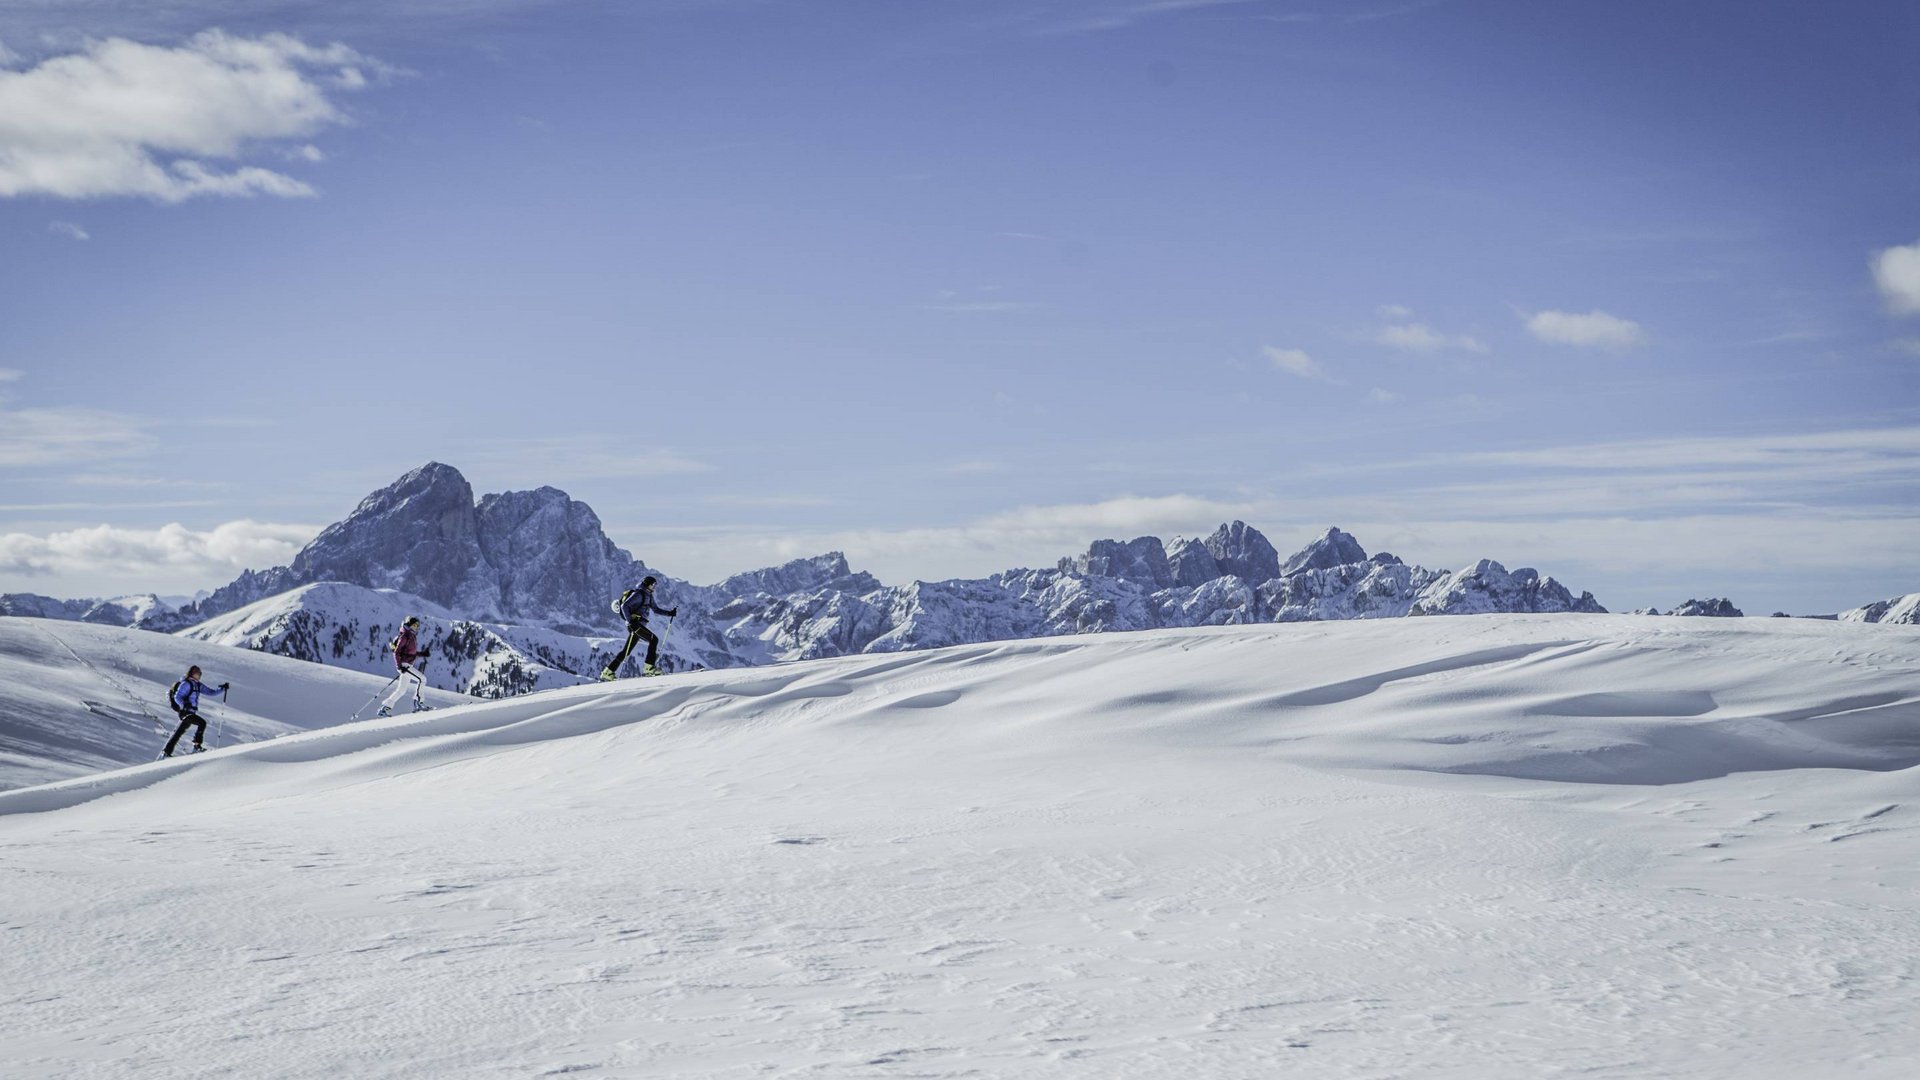 One of the most beautiful hotels in the Dolomites for winter fun